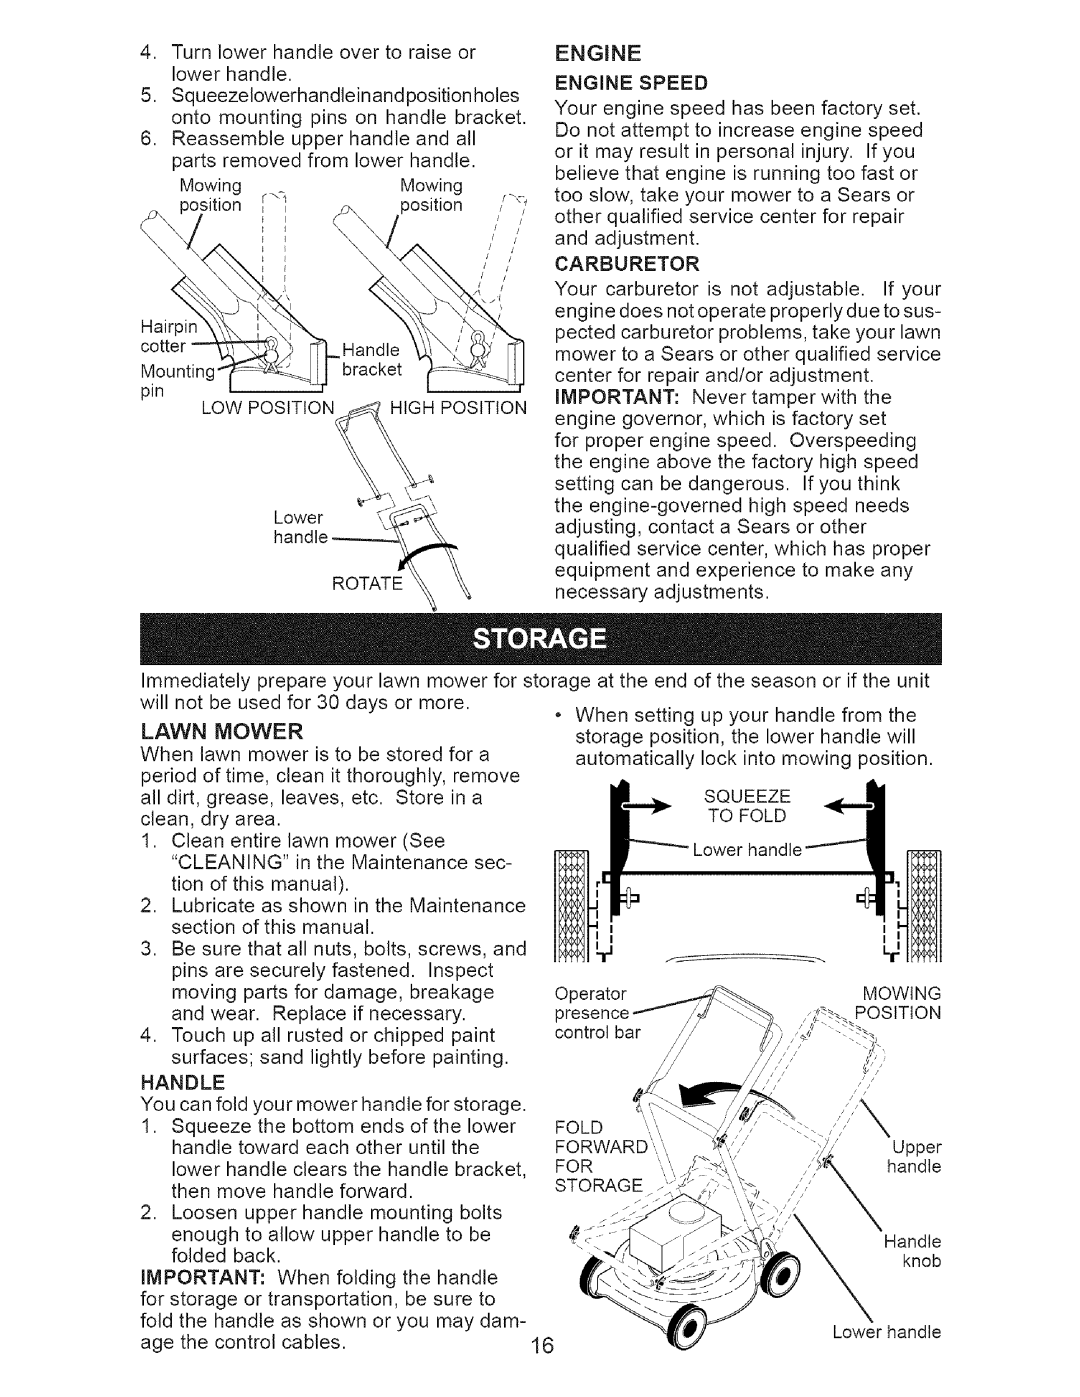 Craftsman 917.376676 owner manual Turnlower handleover to raiseor lower handle, Mowing, position -_, 3osition, Engine 